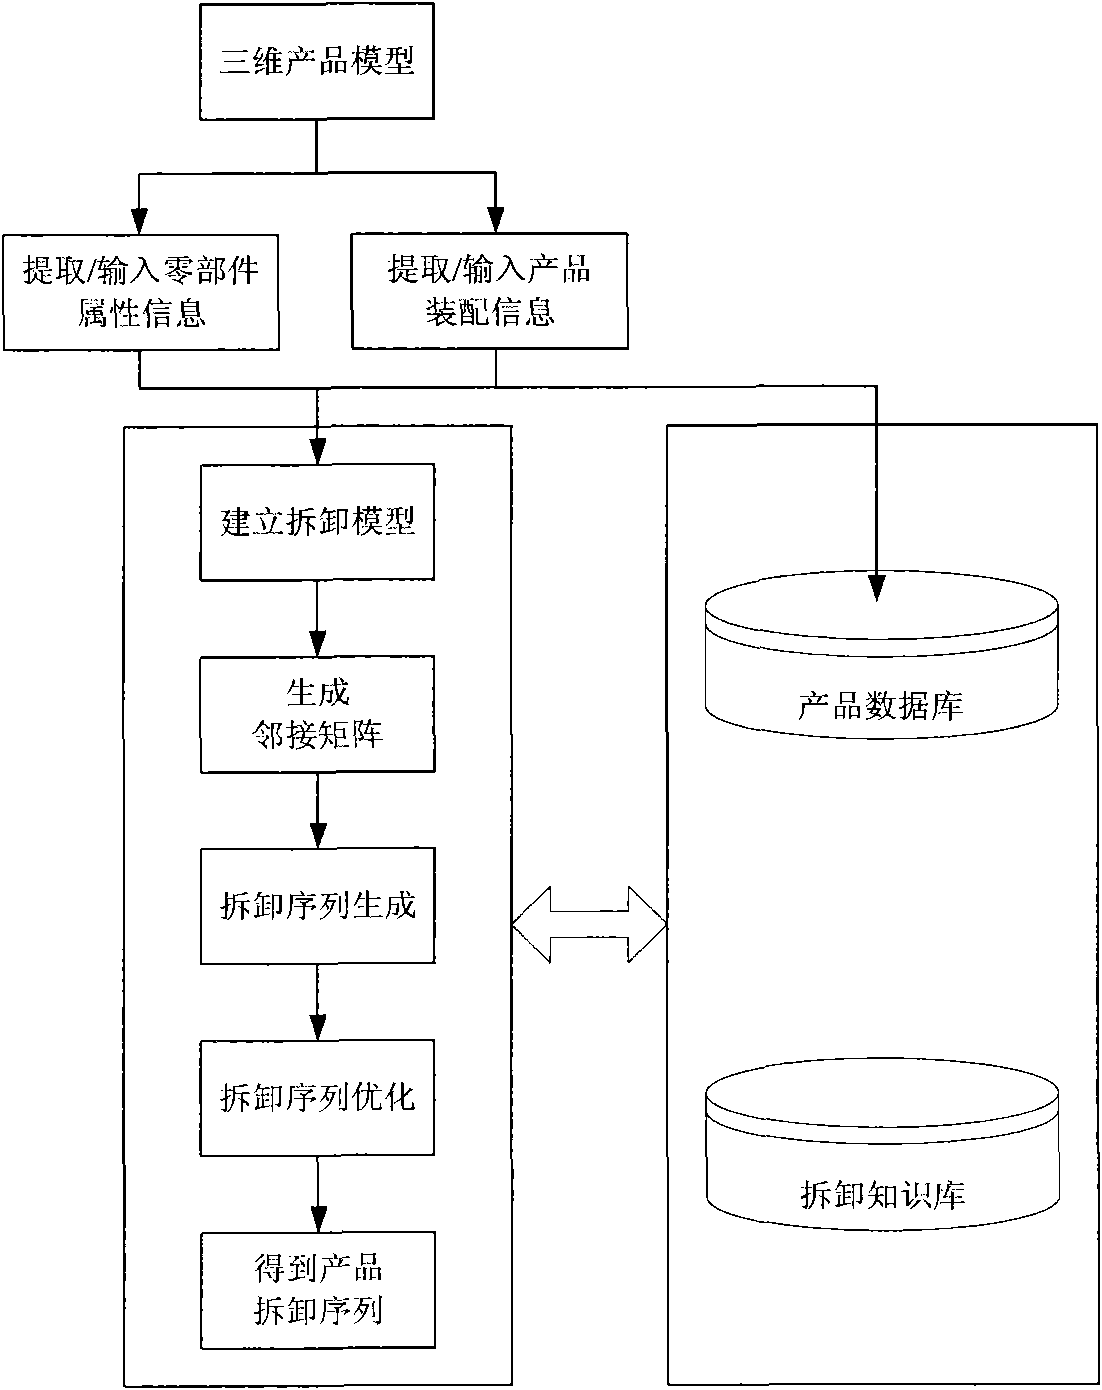 Method for detaching products based on connected piece level network diagram